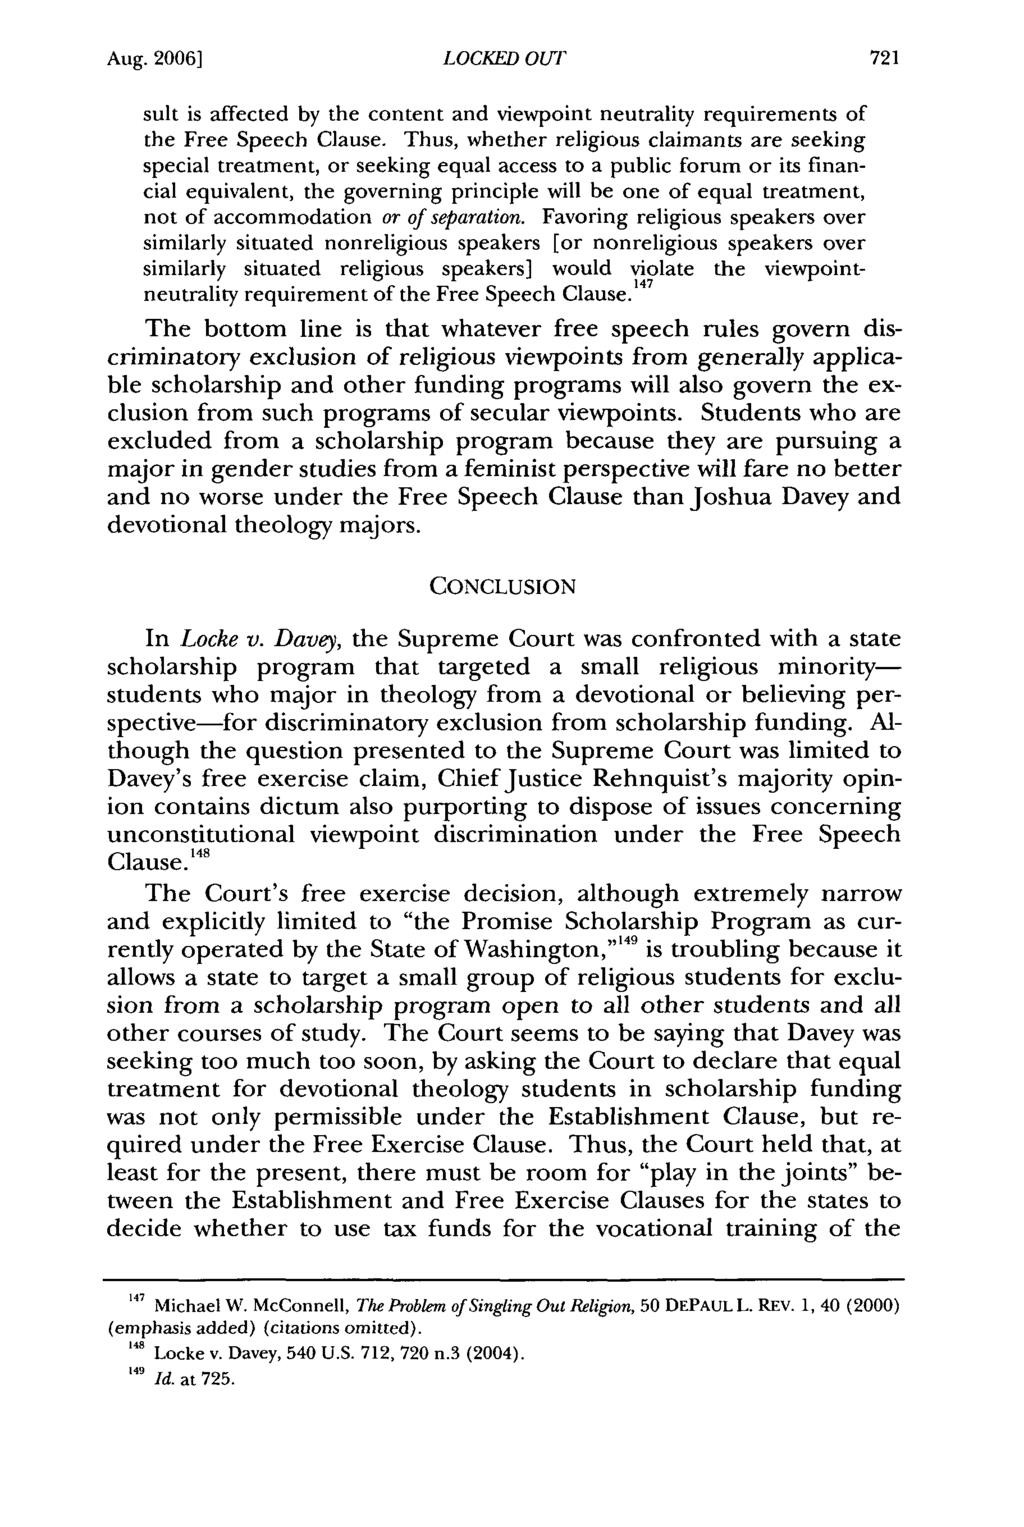 Aug. 2006] LOCKED OUT suit is affected by the content and viewpoint neutrality requirements of the Free Speech Clause.